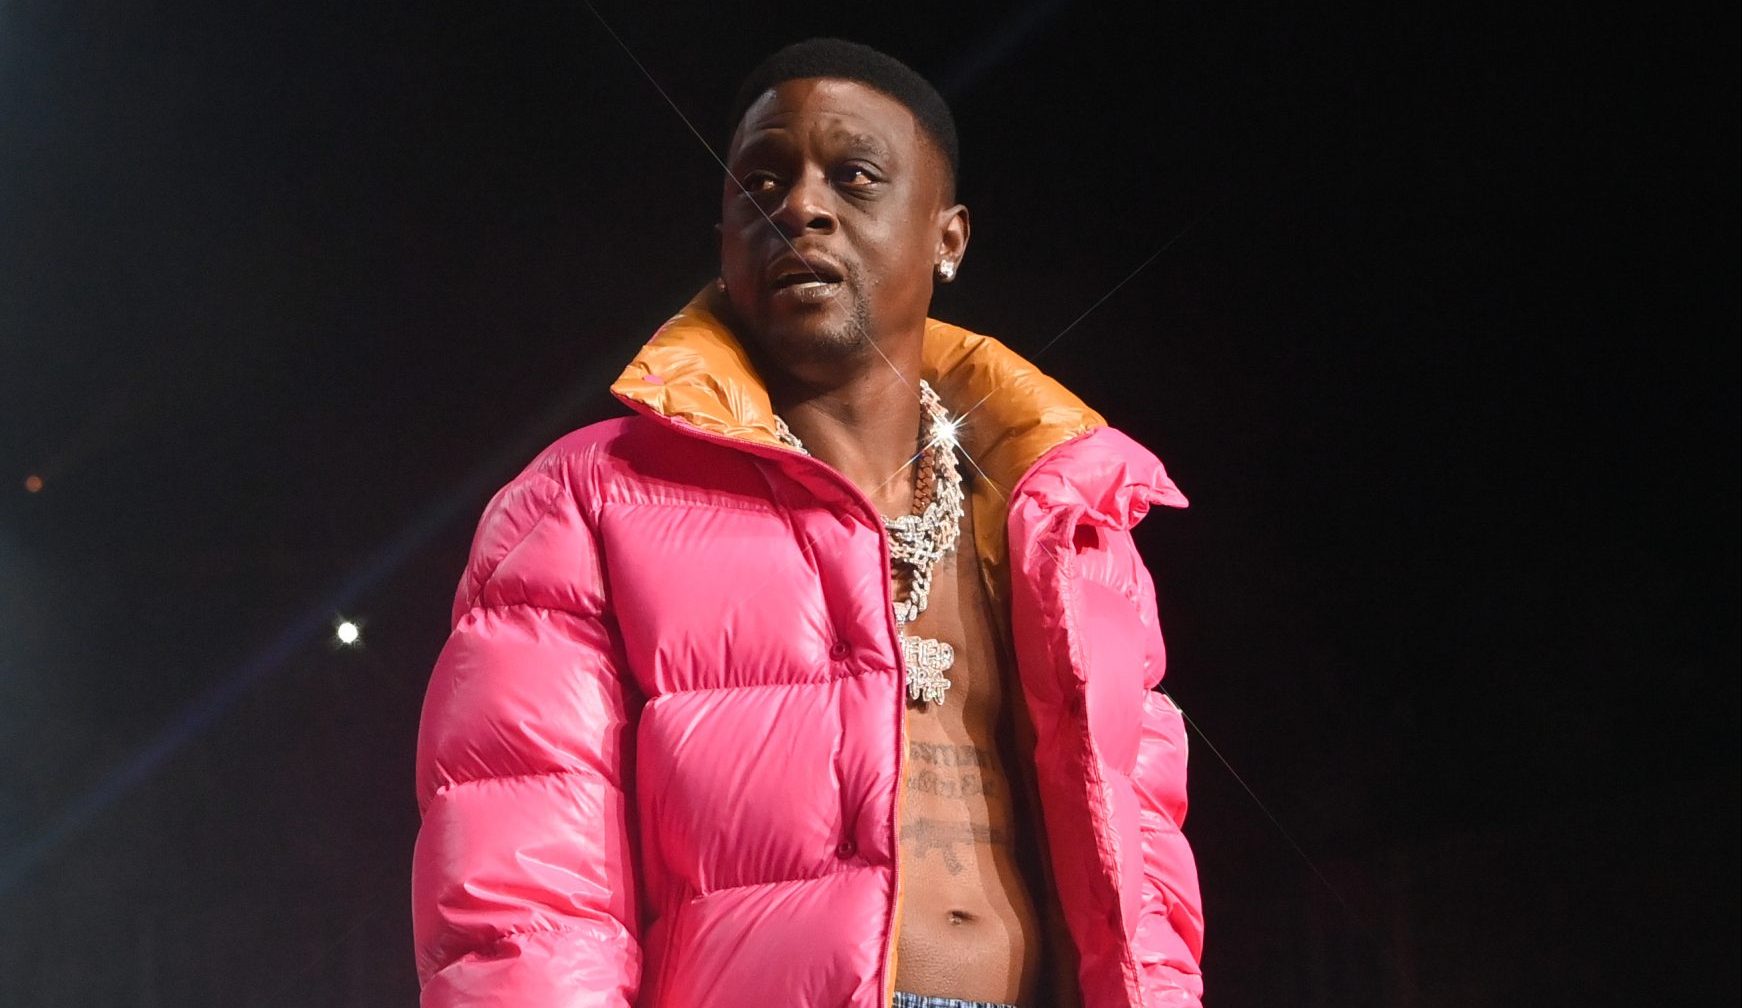 Boosie shared his latest encounter with police after being pulled over and rapped his hit single Set It Off.